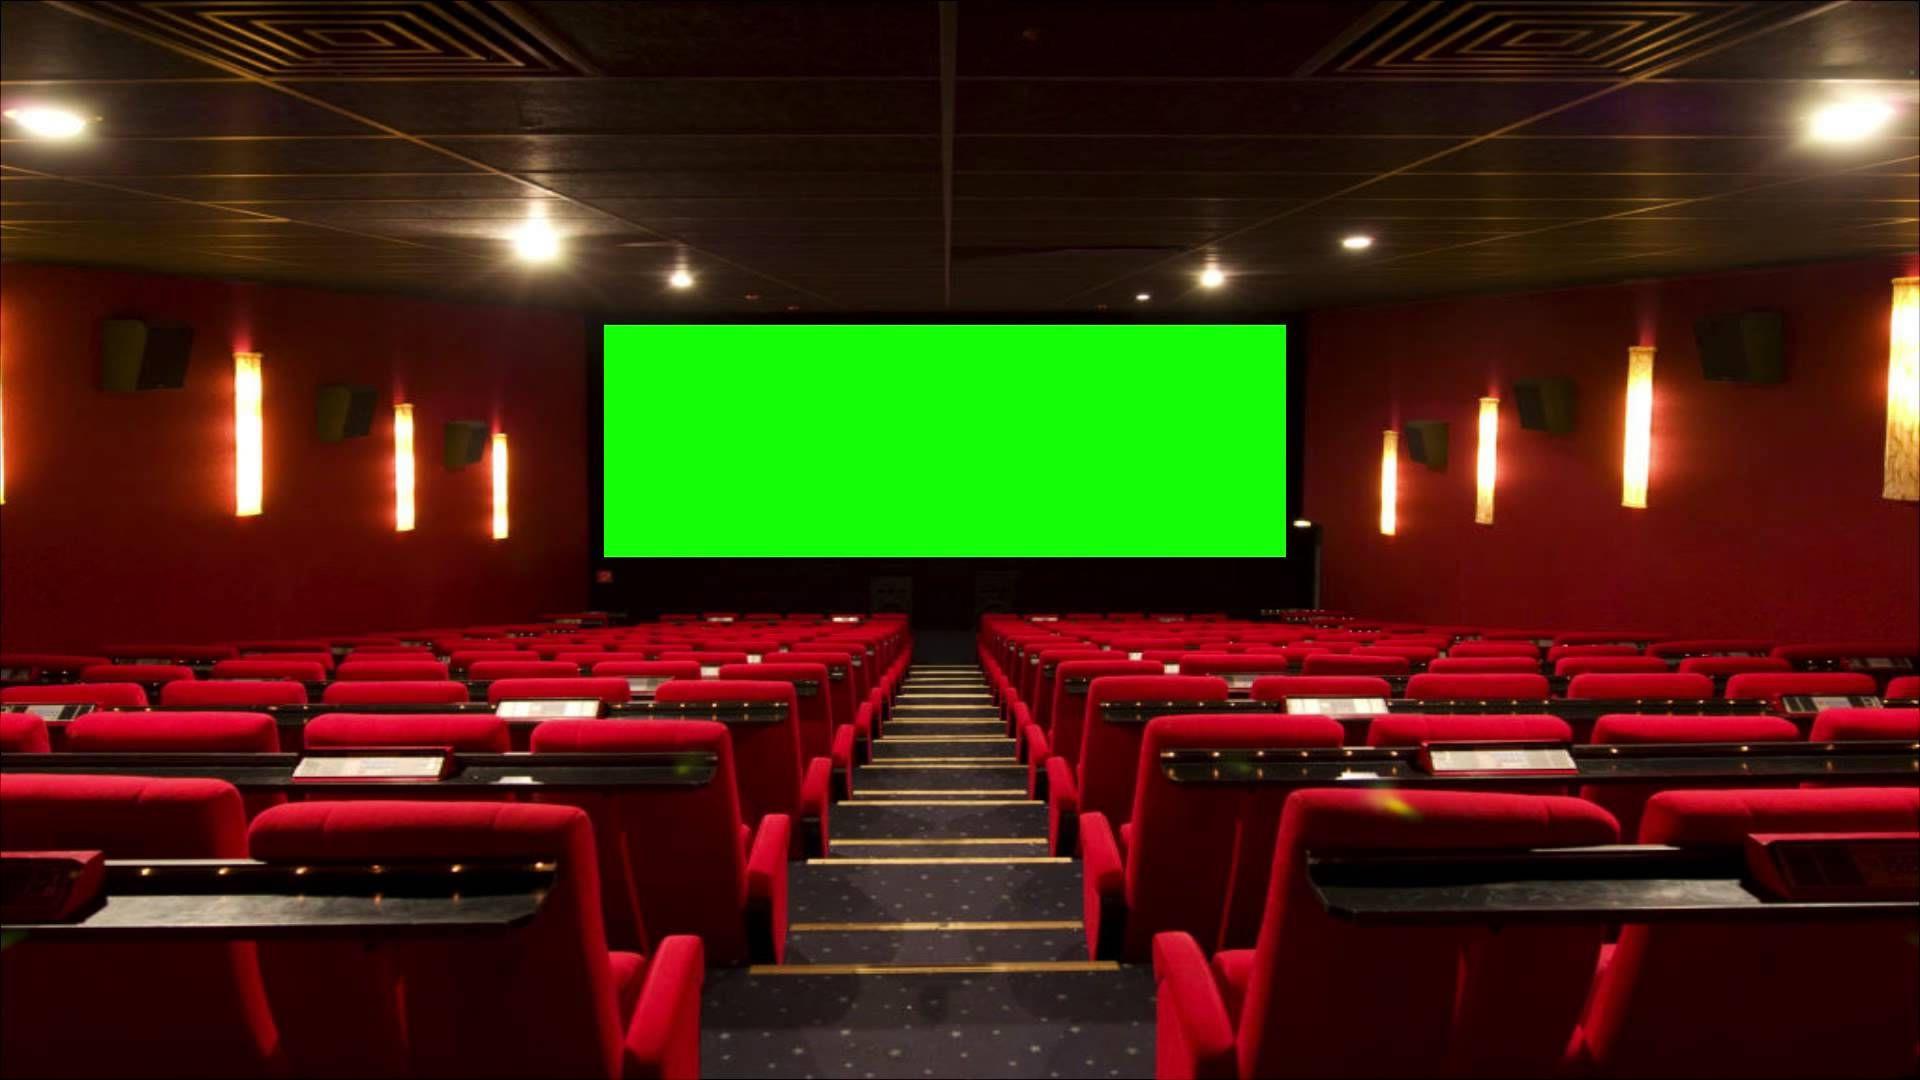 Flashing movie theater compilations